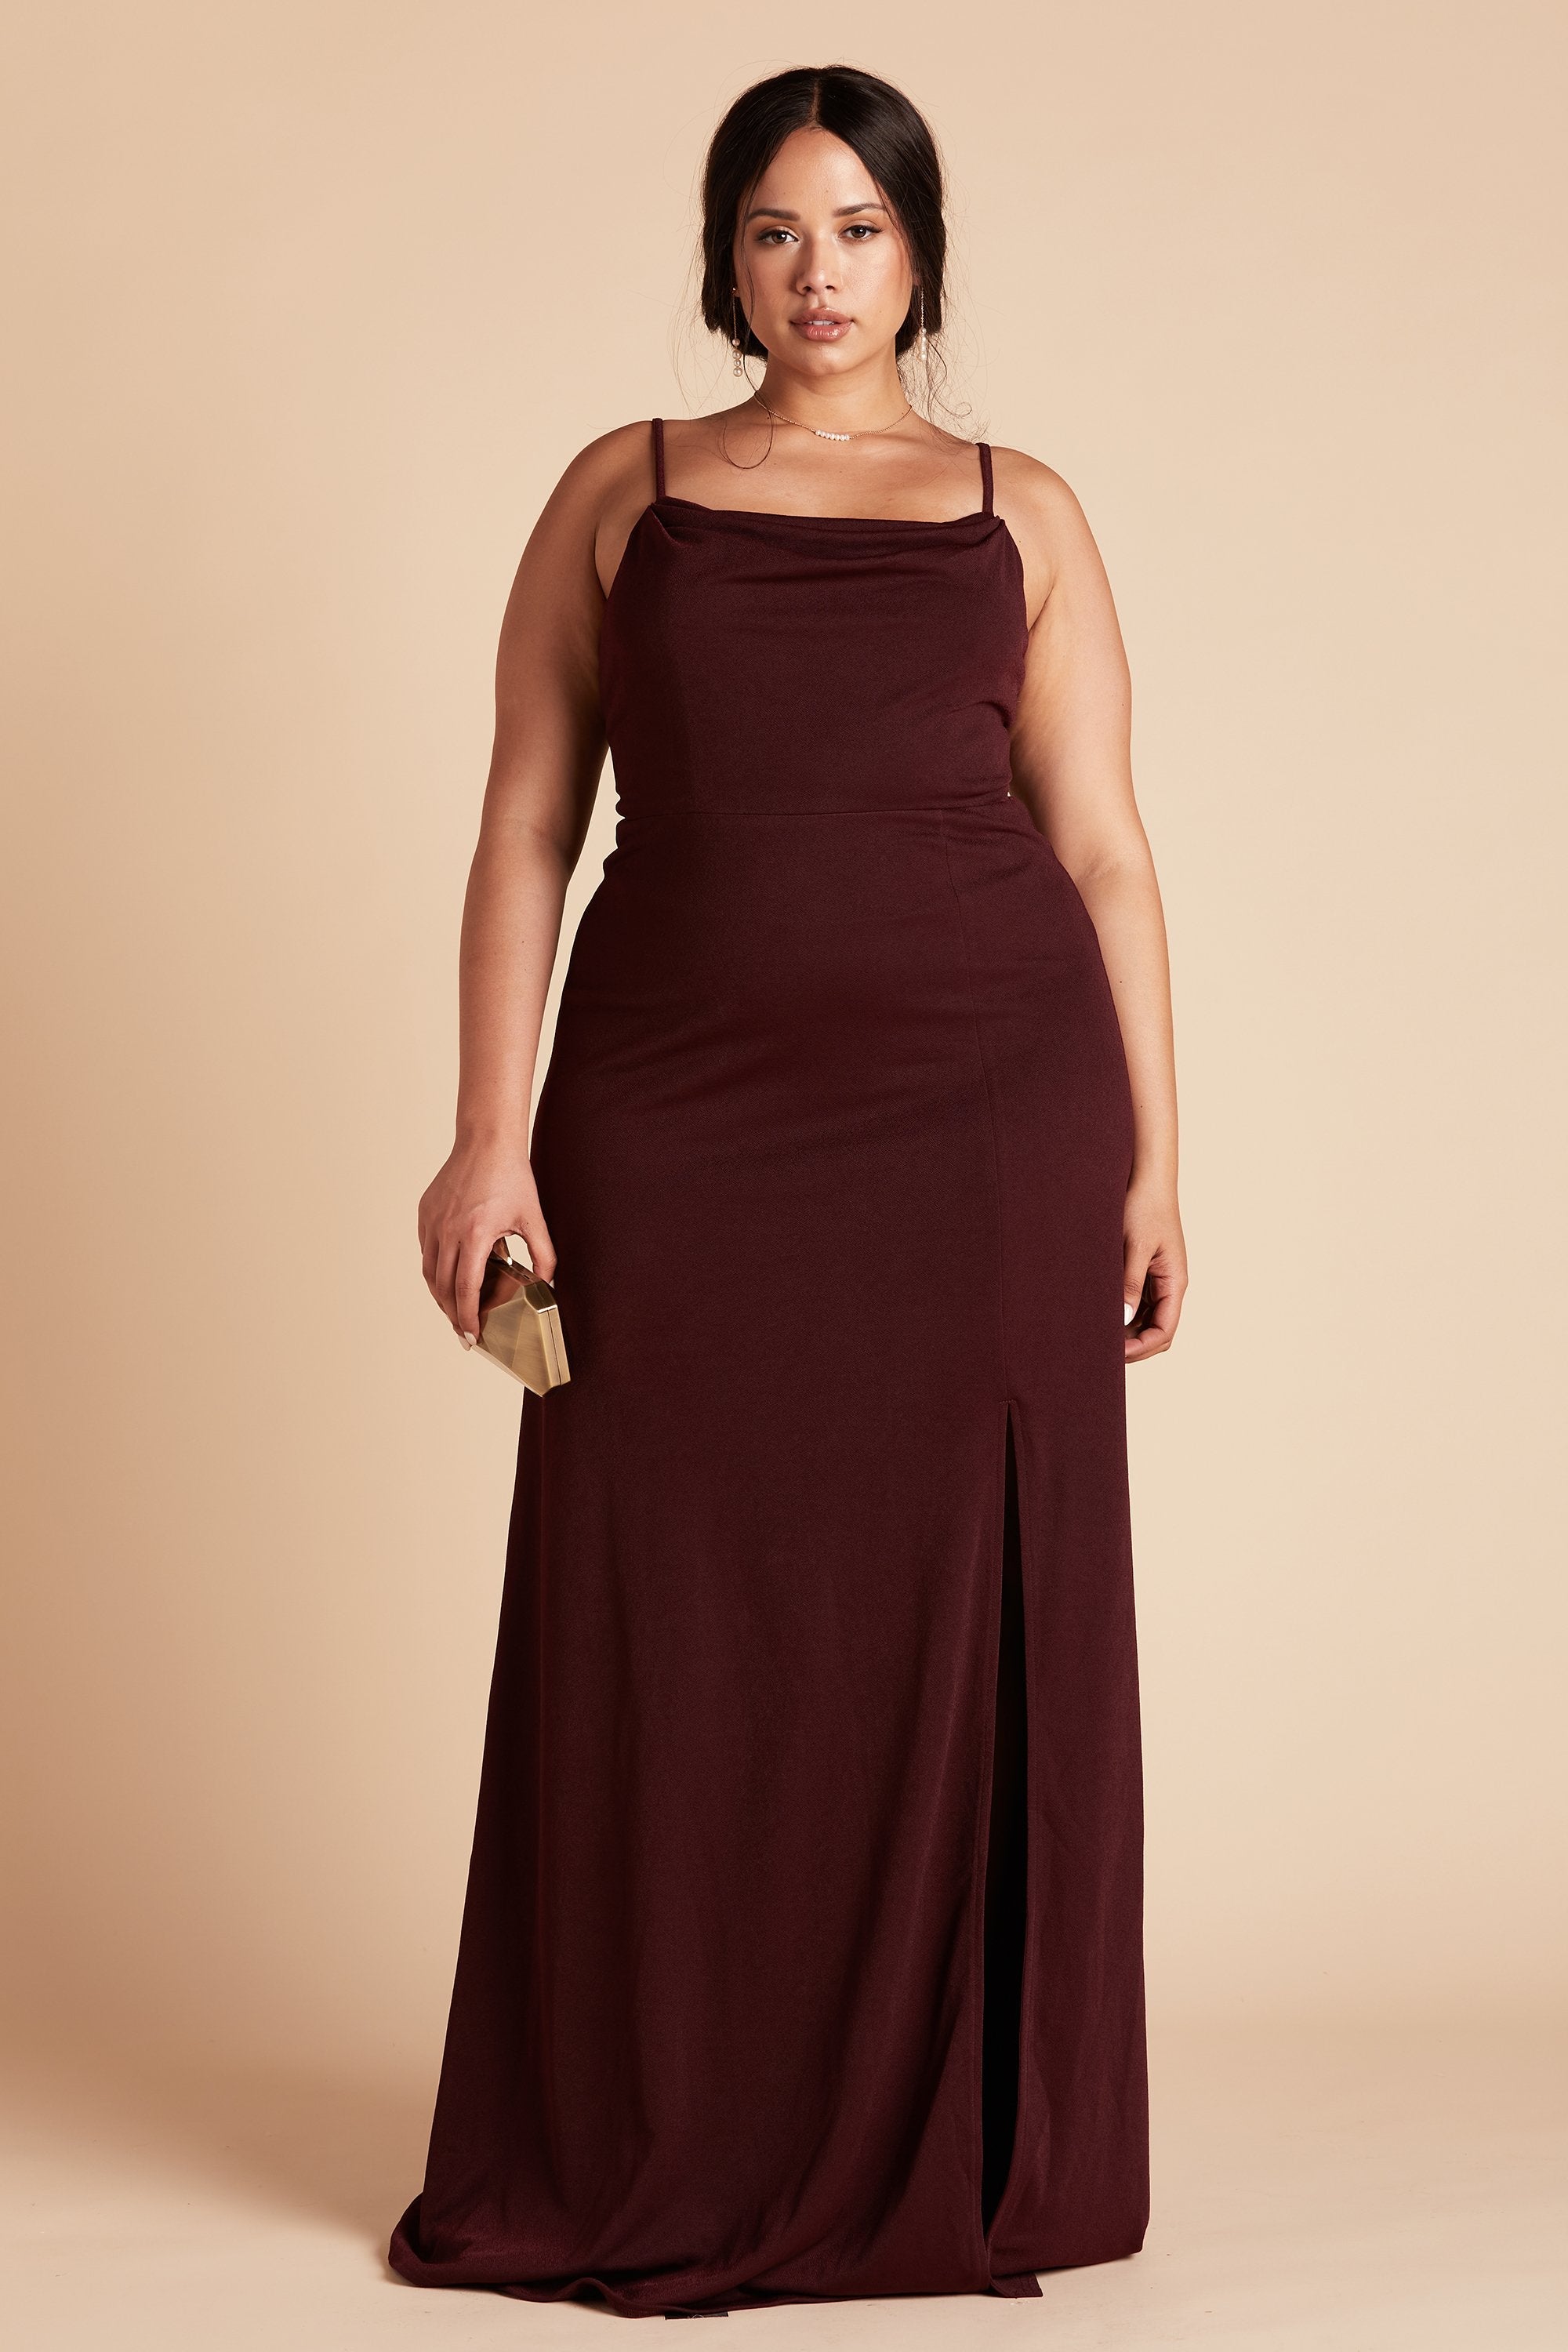 Ash plus size bridesmaid dress with slit in cabernet burgundy crepe by Birdy Grey, front view